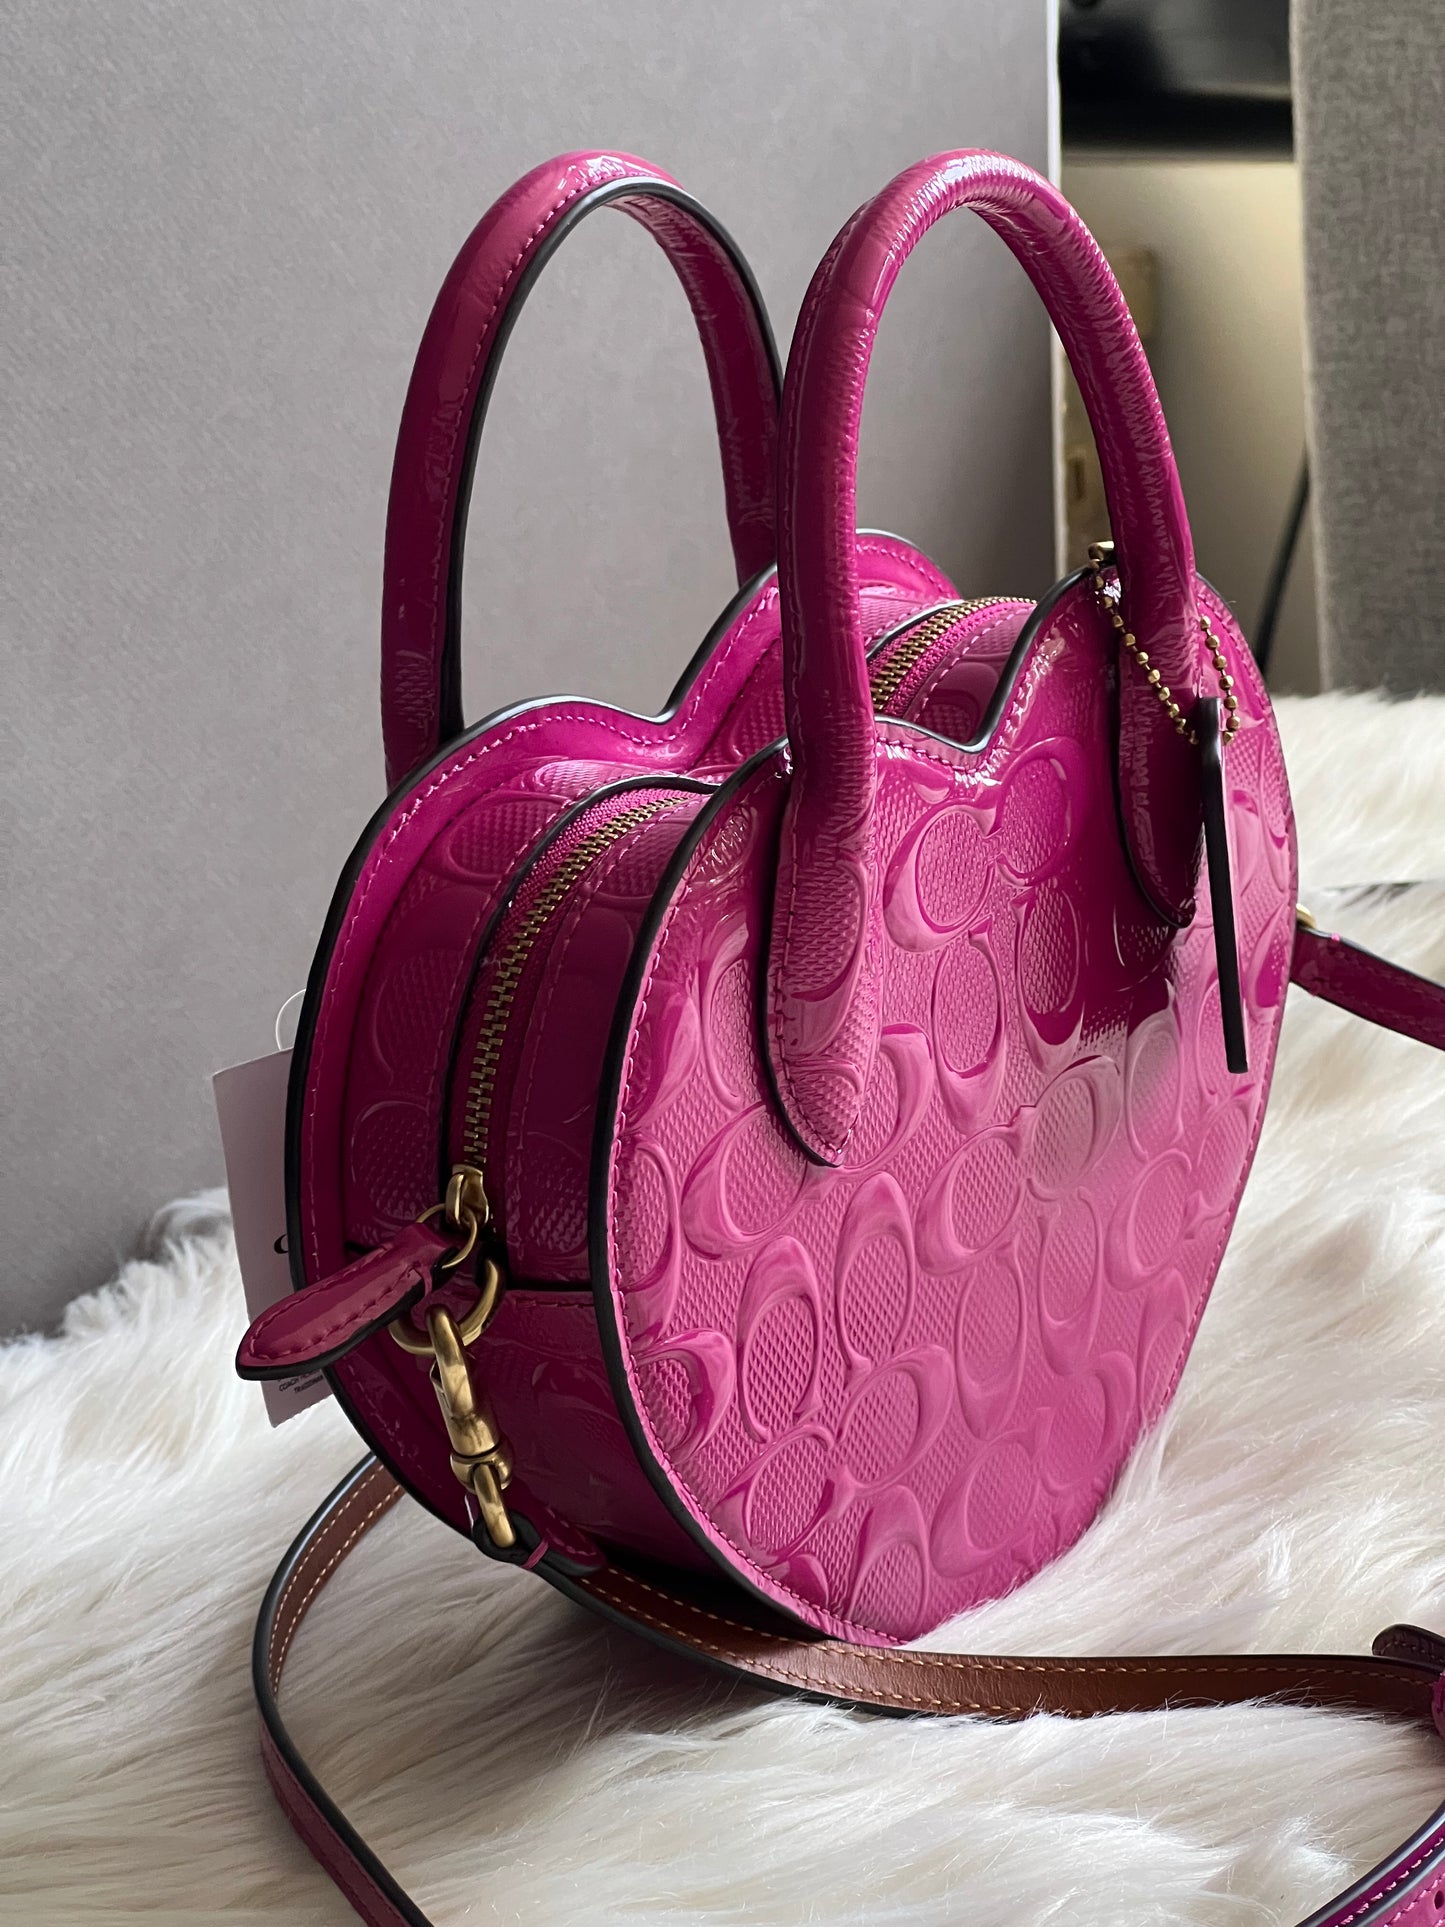 Coach Heart Bag in Signature Leather